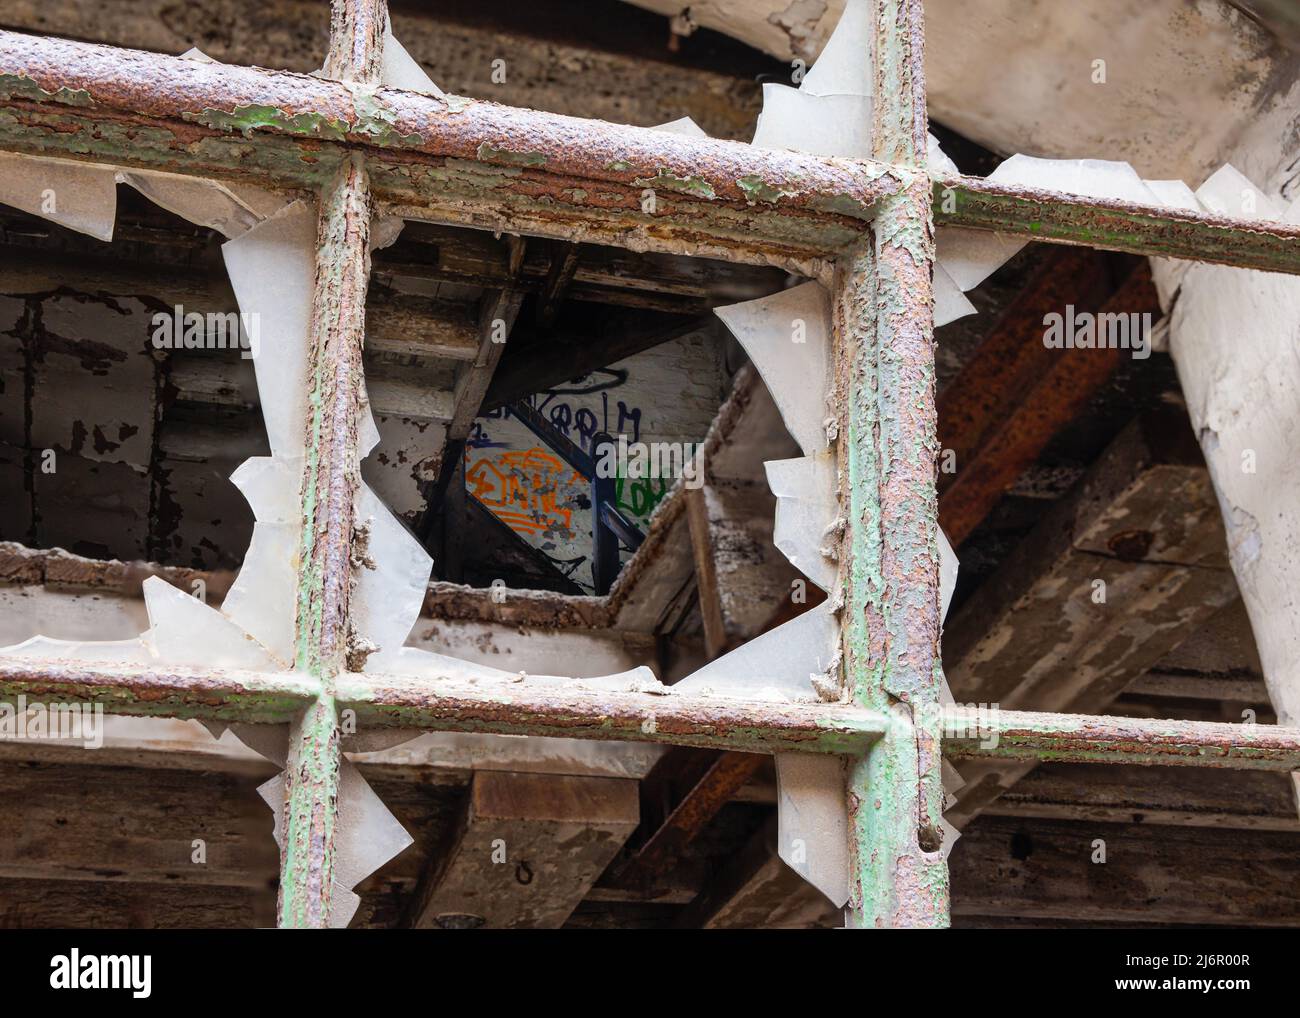 Broken panes of glass in square metal window frames, covered with rust and peeling green paint. A derelict interior is visible beyond. Stock Photo